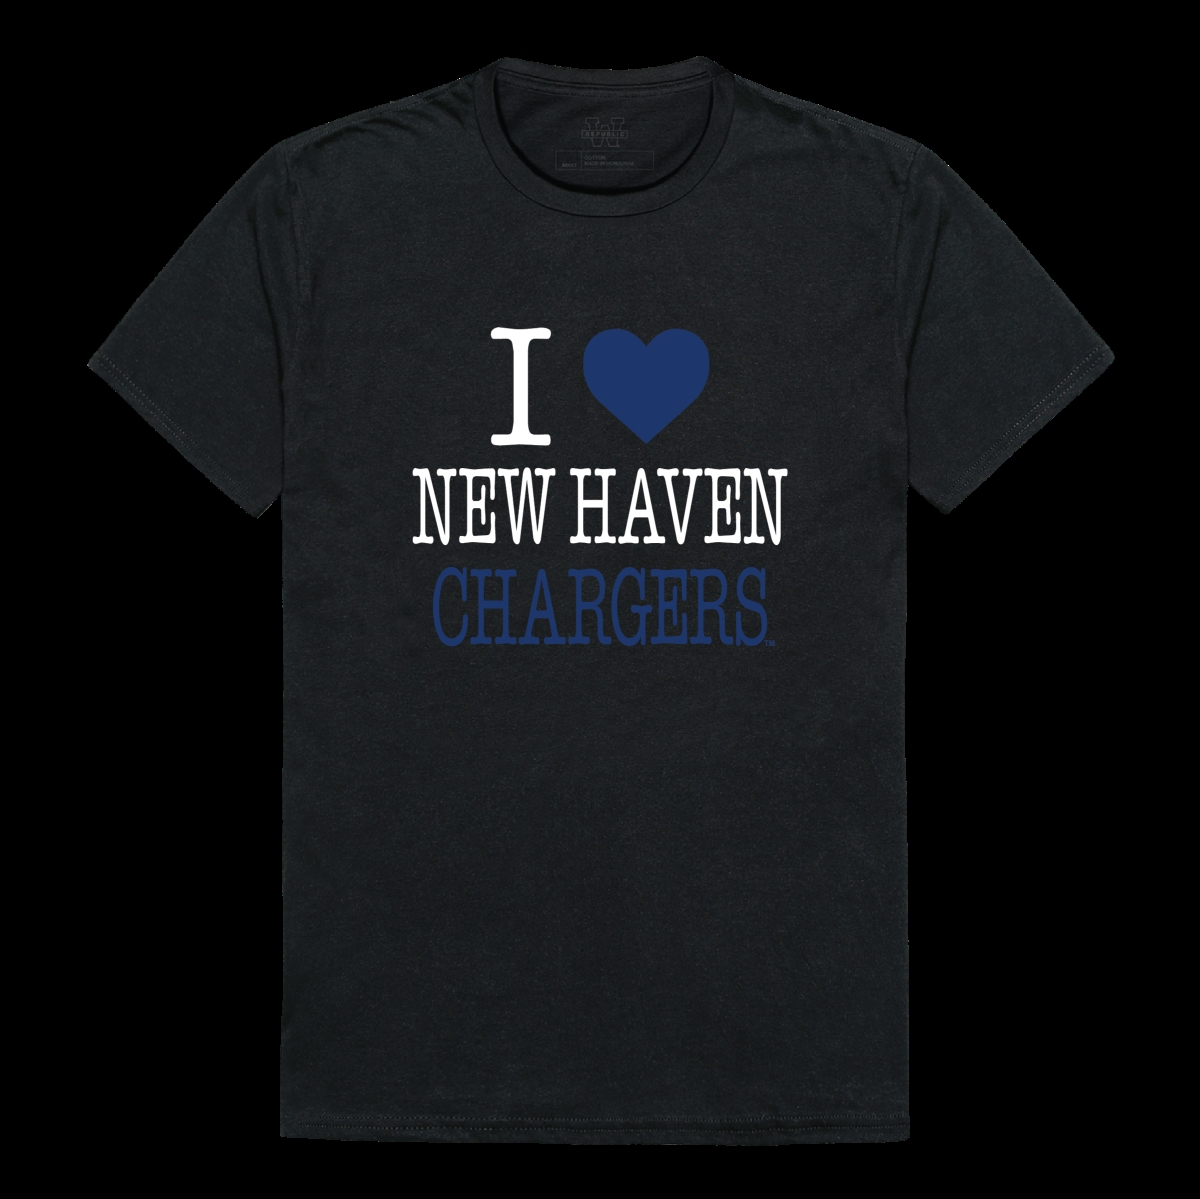 W Republic 551-663-BLK-04 University of New Haven Chargers I Love T-Shirt&#44; Black - Extra Large